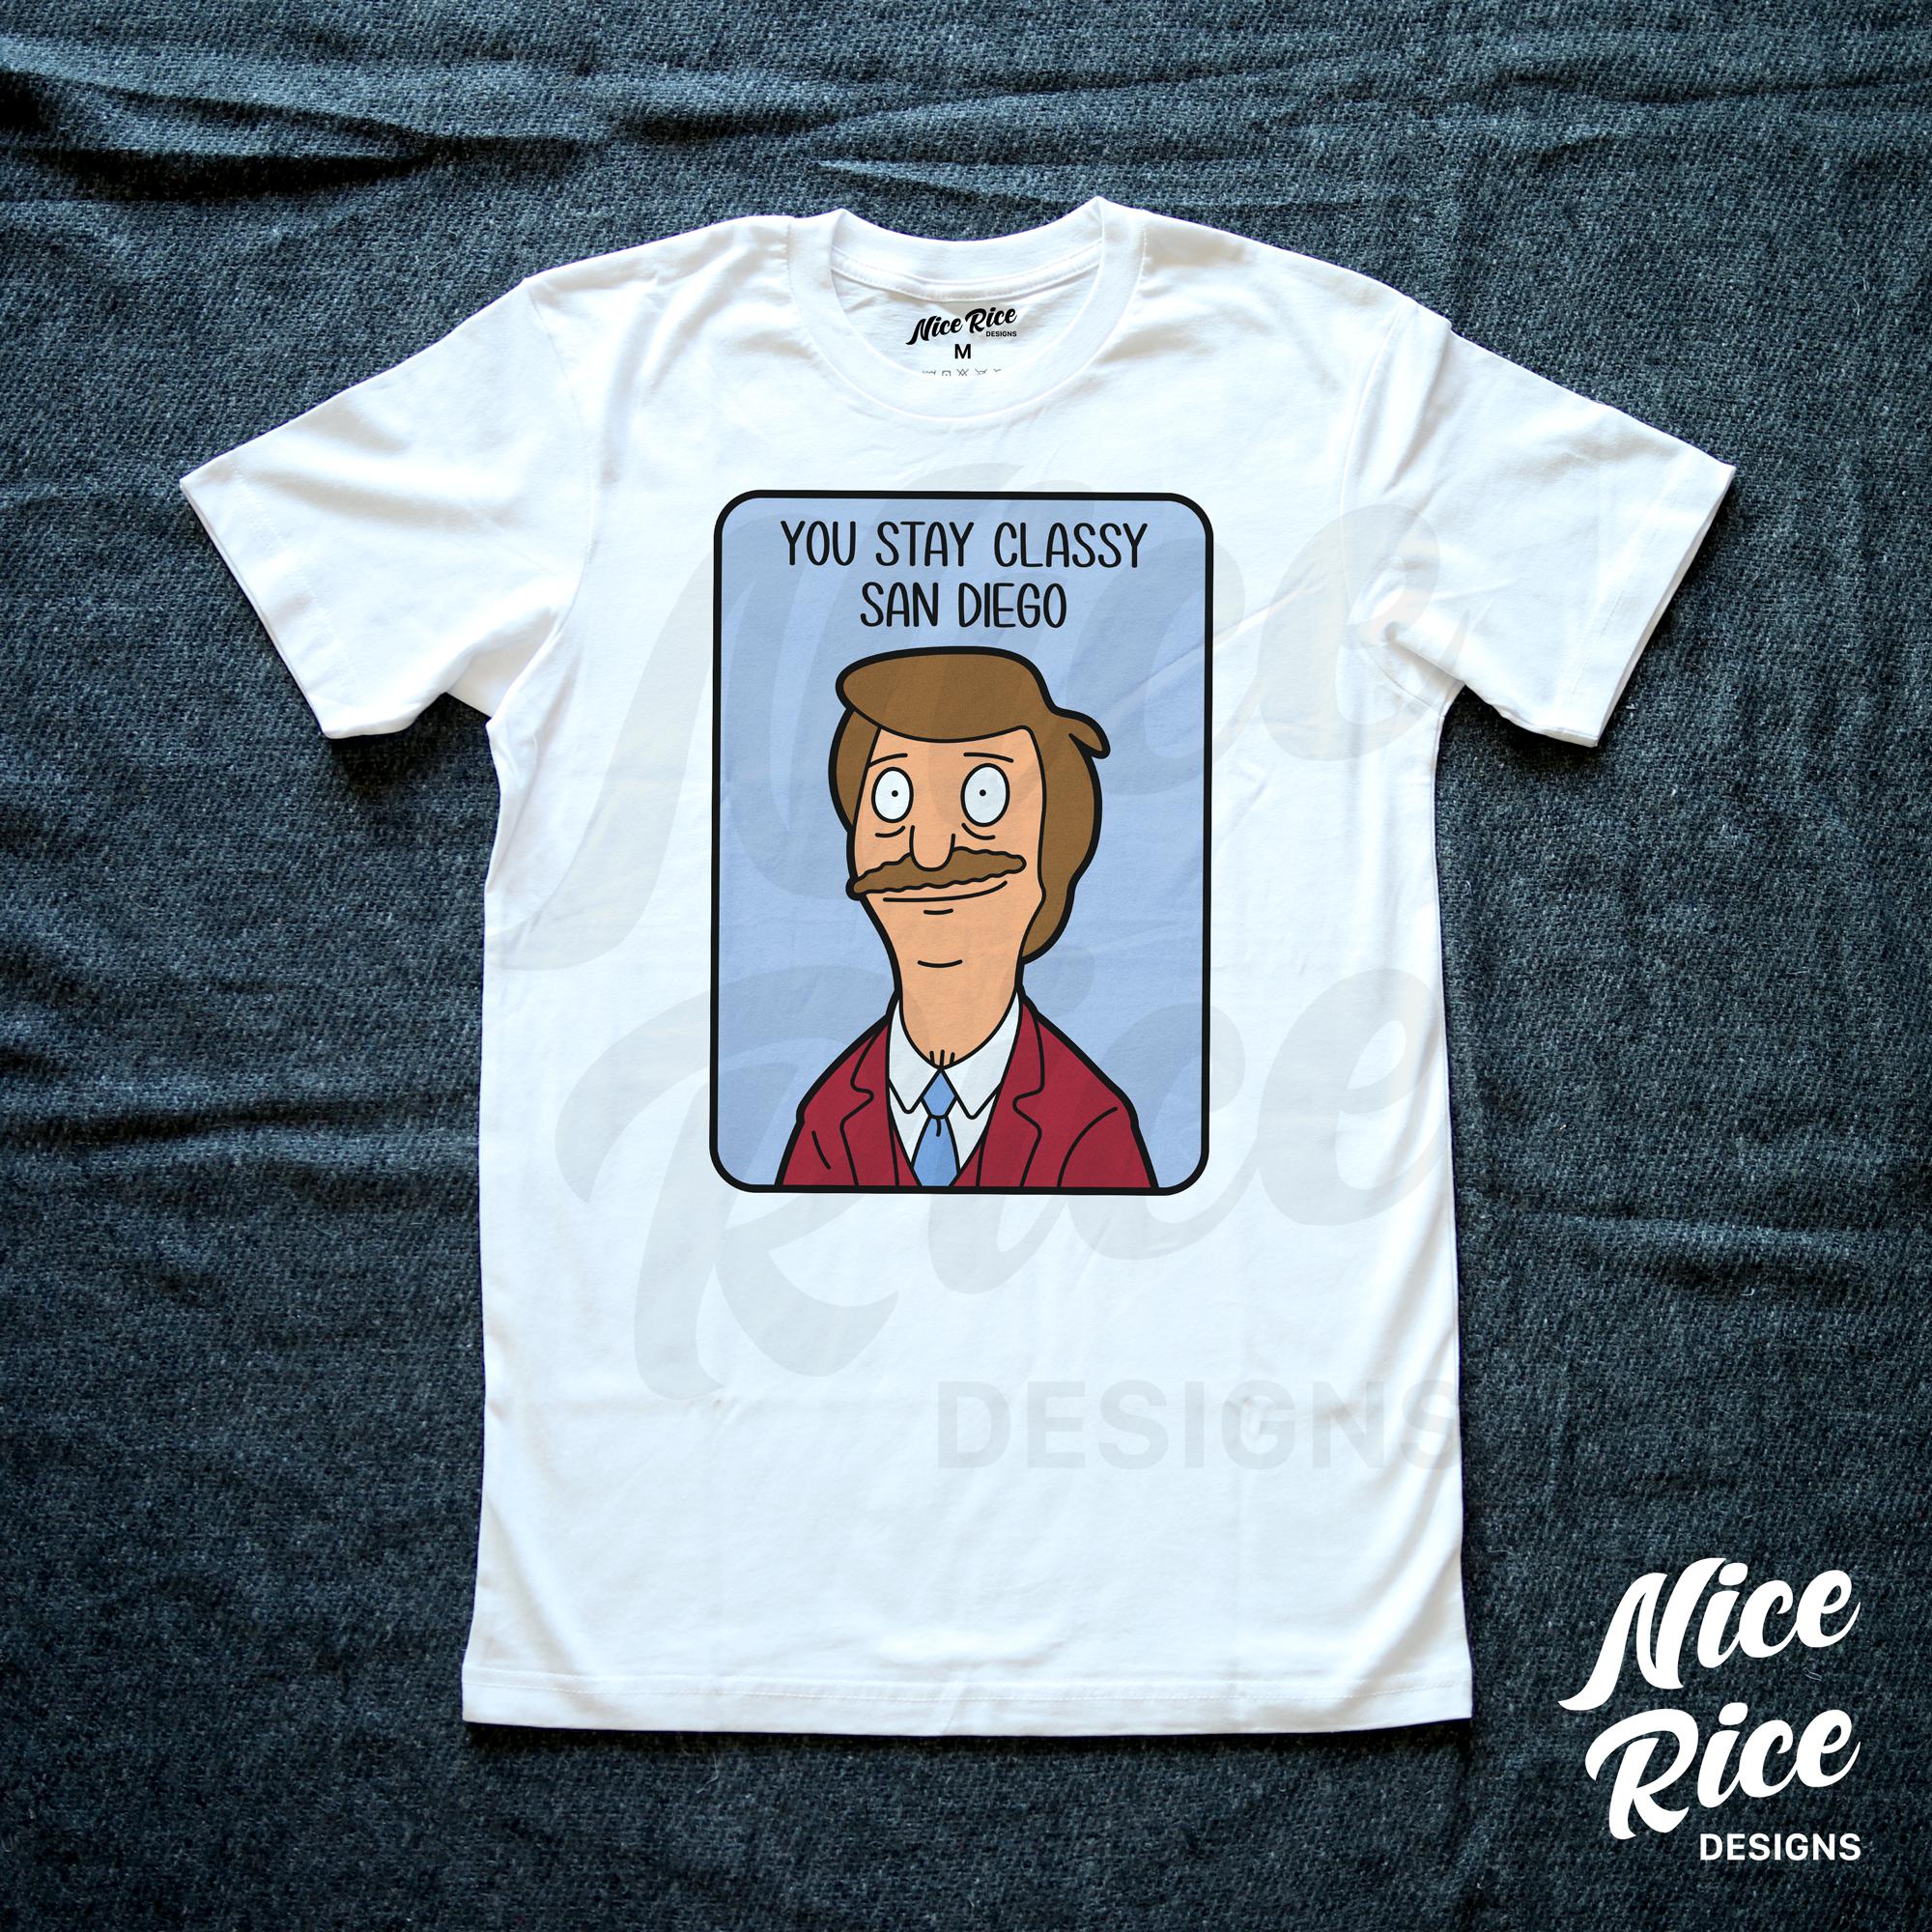 Stay Classy Shirt by Nice Rice Designs